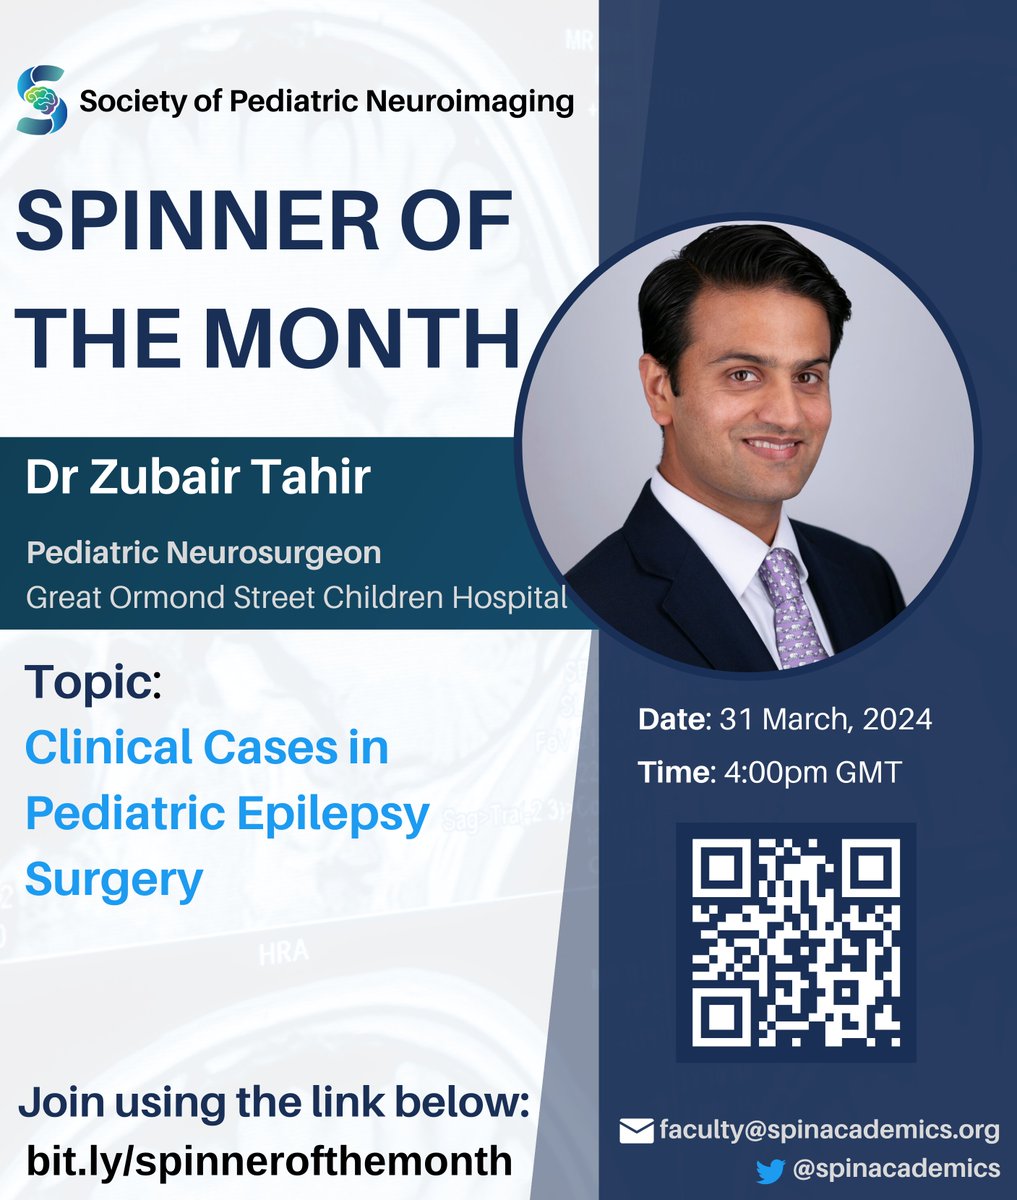 🎉 Excited to announce our Spinner of the Month for March: Dr Zubair Tahir! 📷 Join us for his talk on 'Clinical Cases in Pediatric Epilepsy Surgery' 📷#PediatricNeurosurgery #Neuroradiology